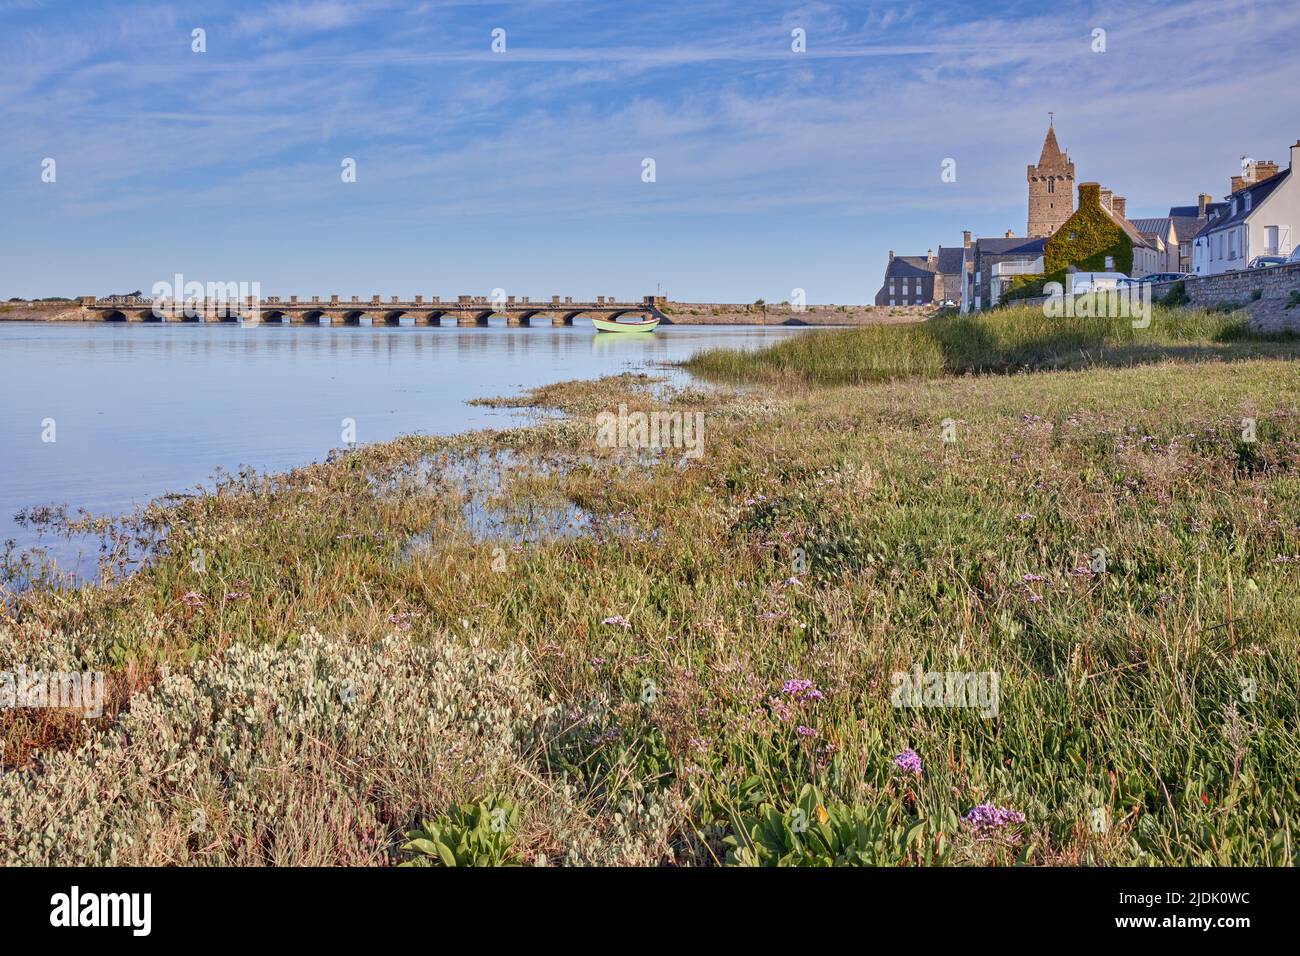 Image of Port Bail, Normandy, France with church and bridge at high tide early morning. Stock Photo